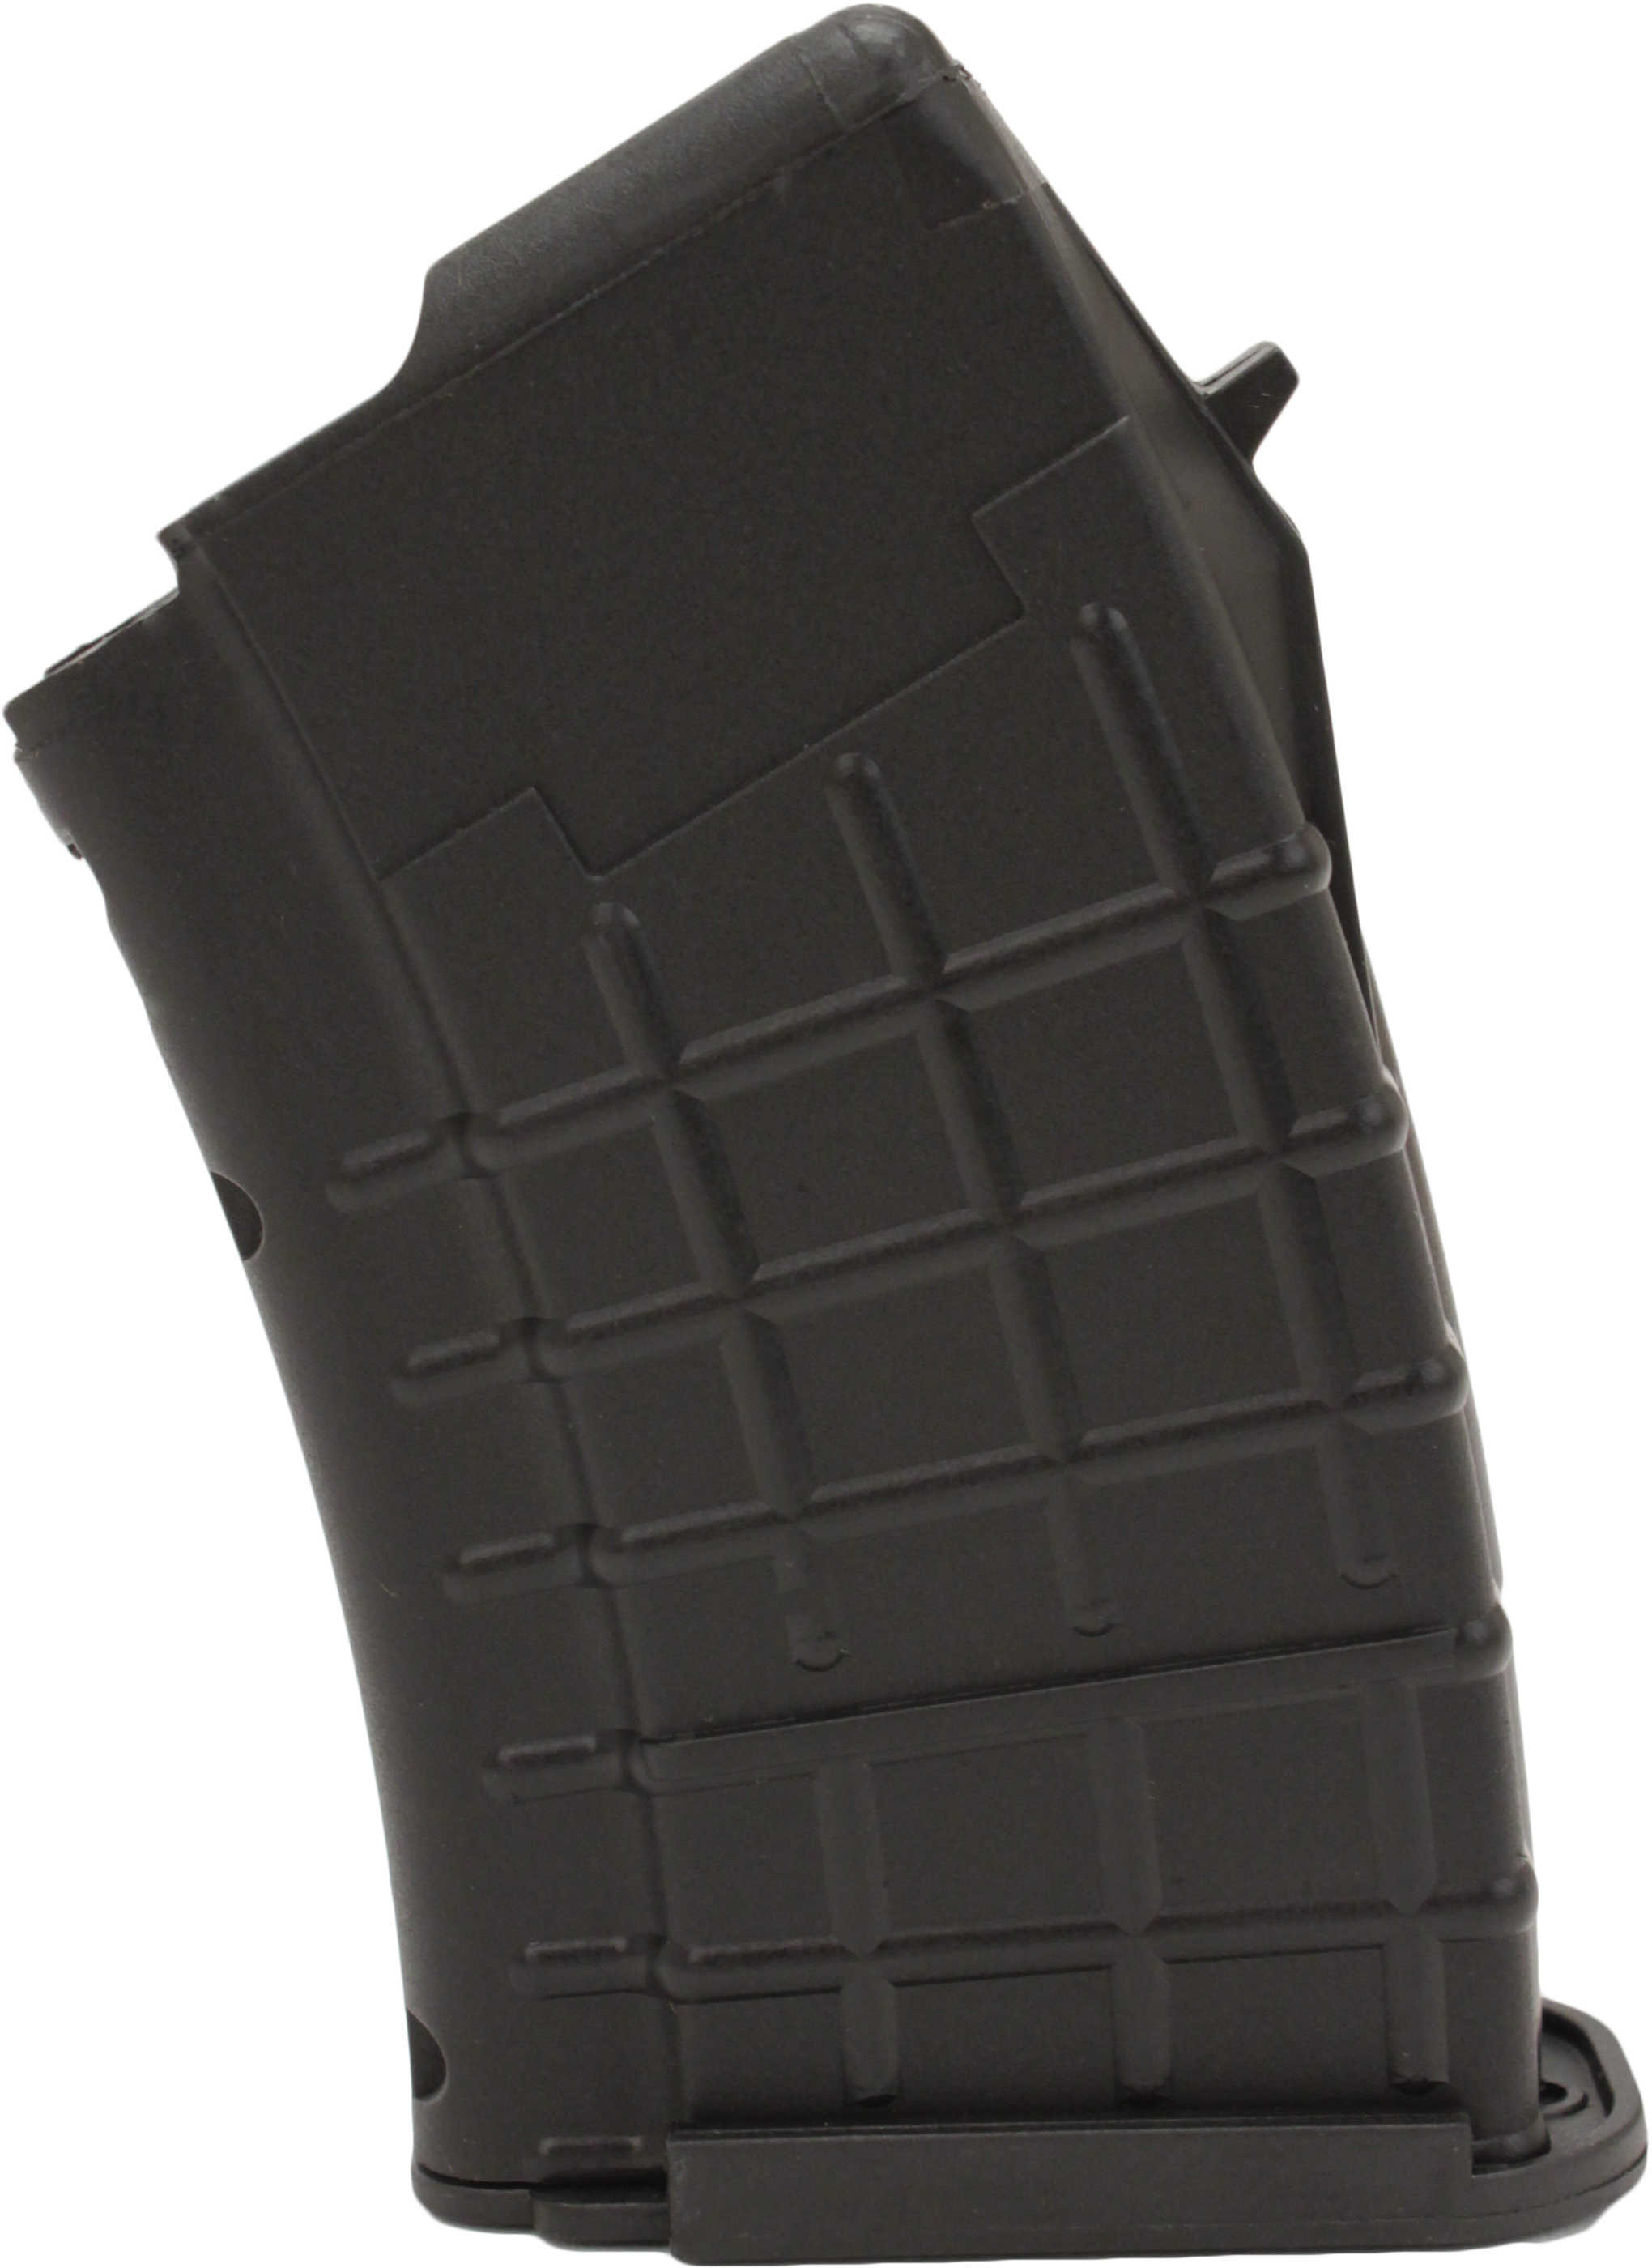 ProMag AK-47 Magazine 7.62x39 Caliber - 10 round Black Polymer Easy loading High-quality injection-molded AK08